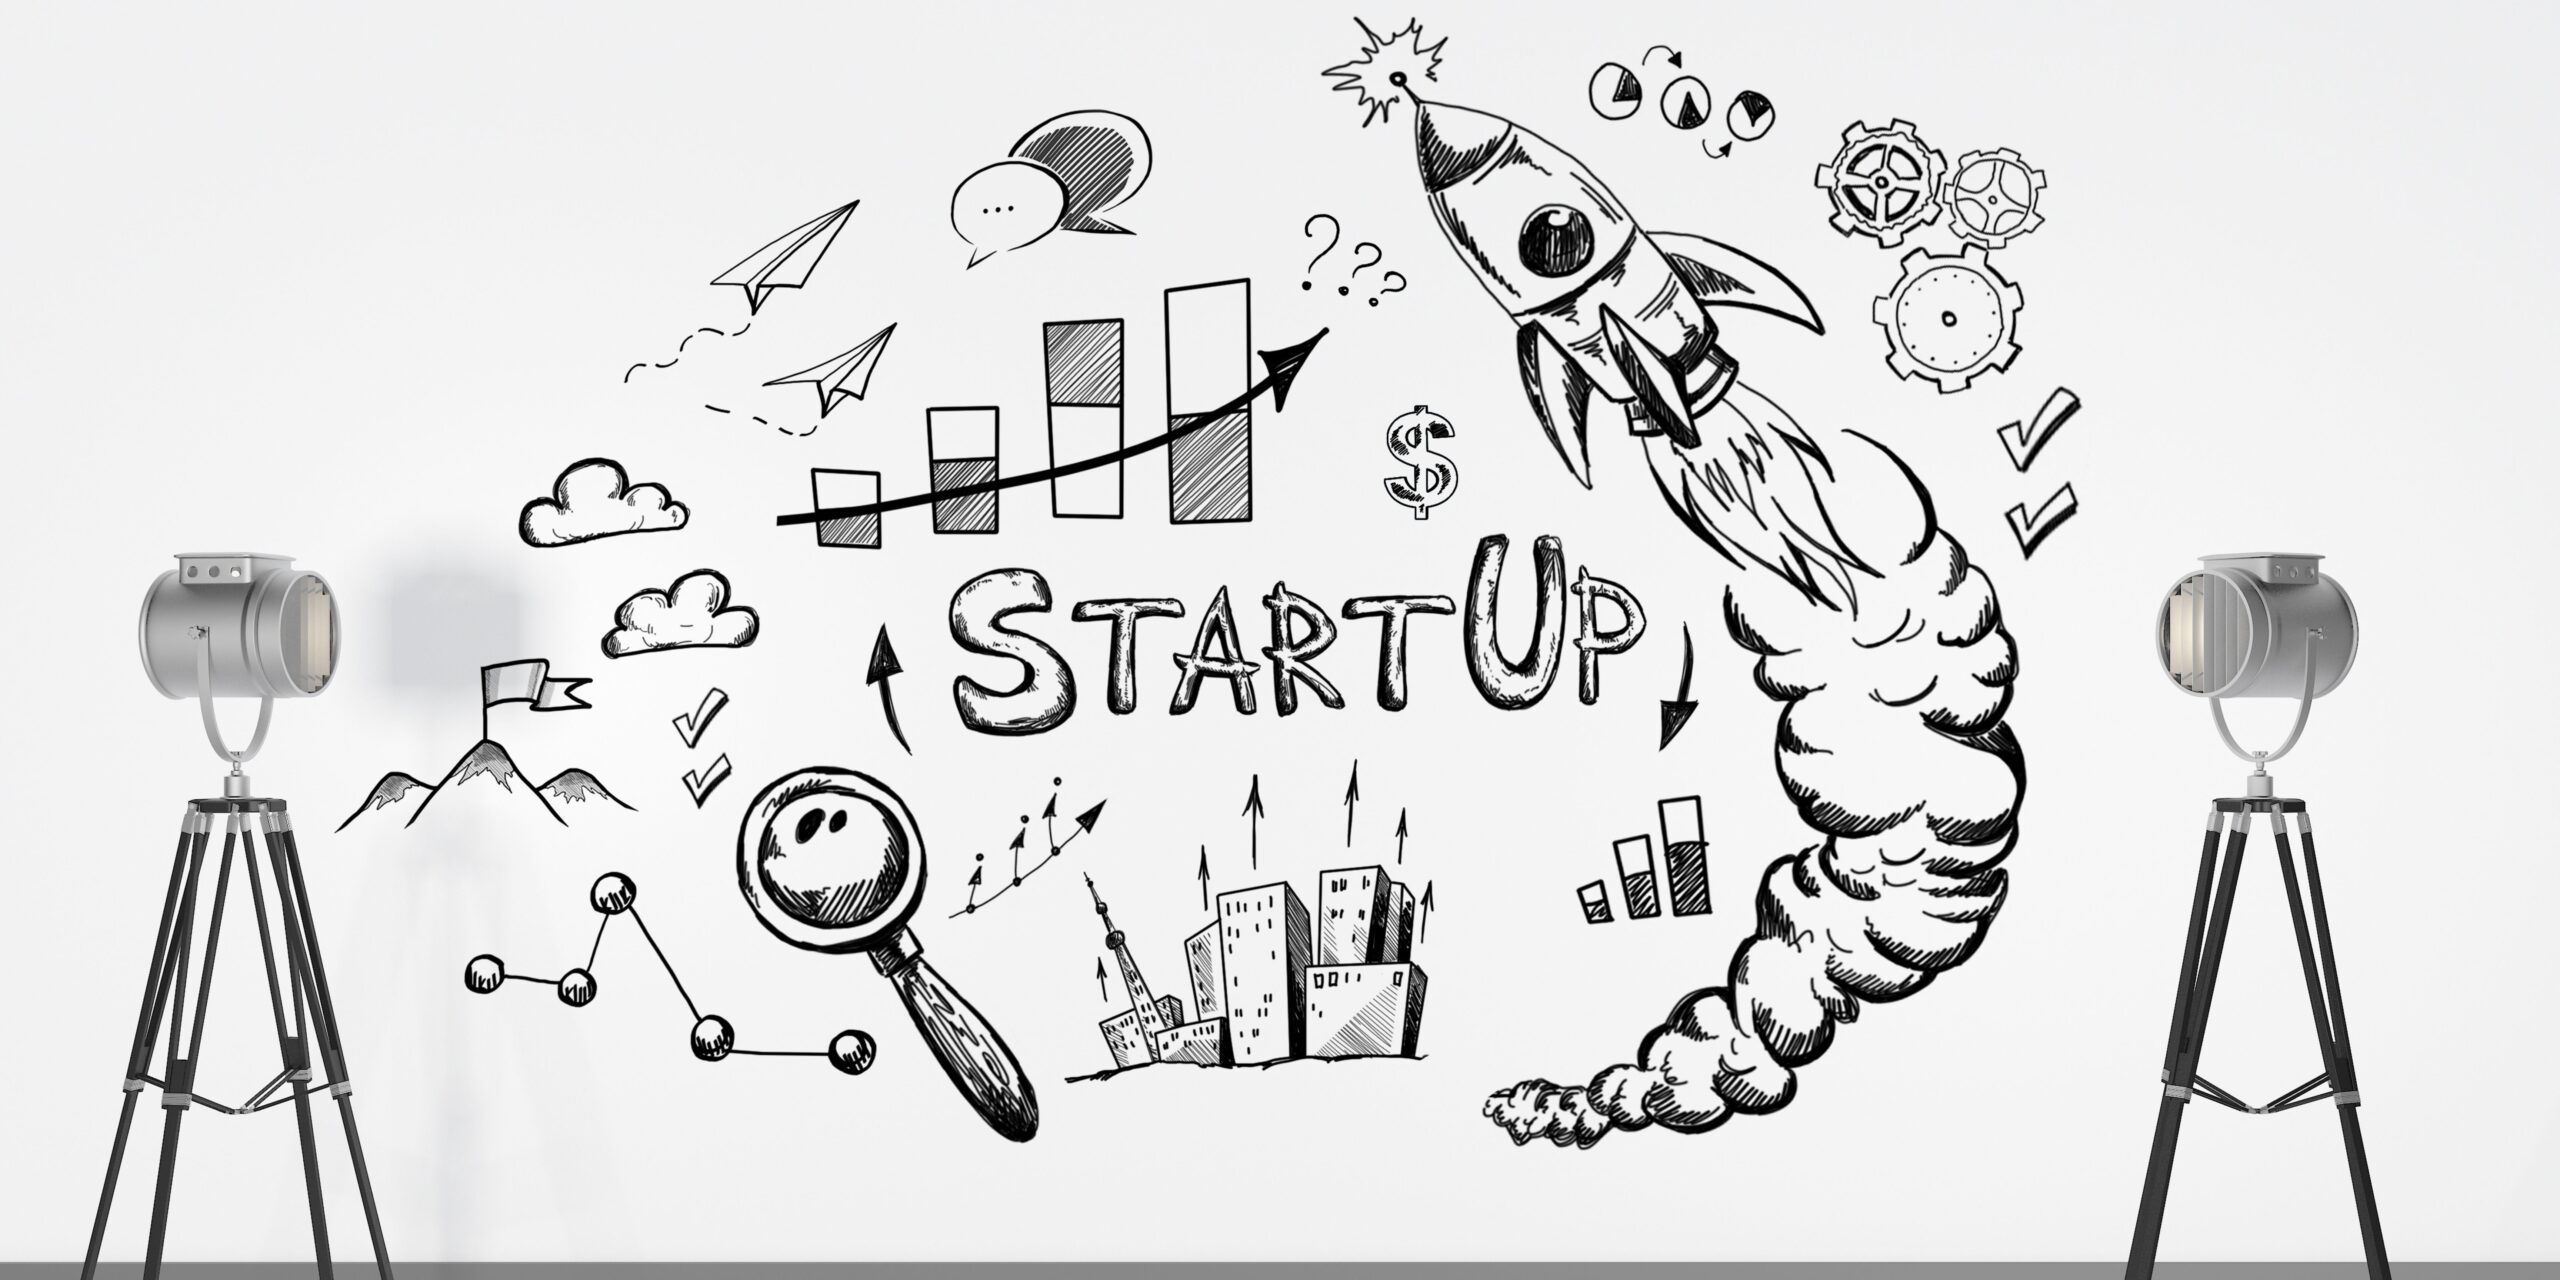 Startup Studios, Startup Incubators and Startup Accelerators – What do they all do!?